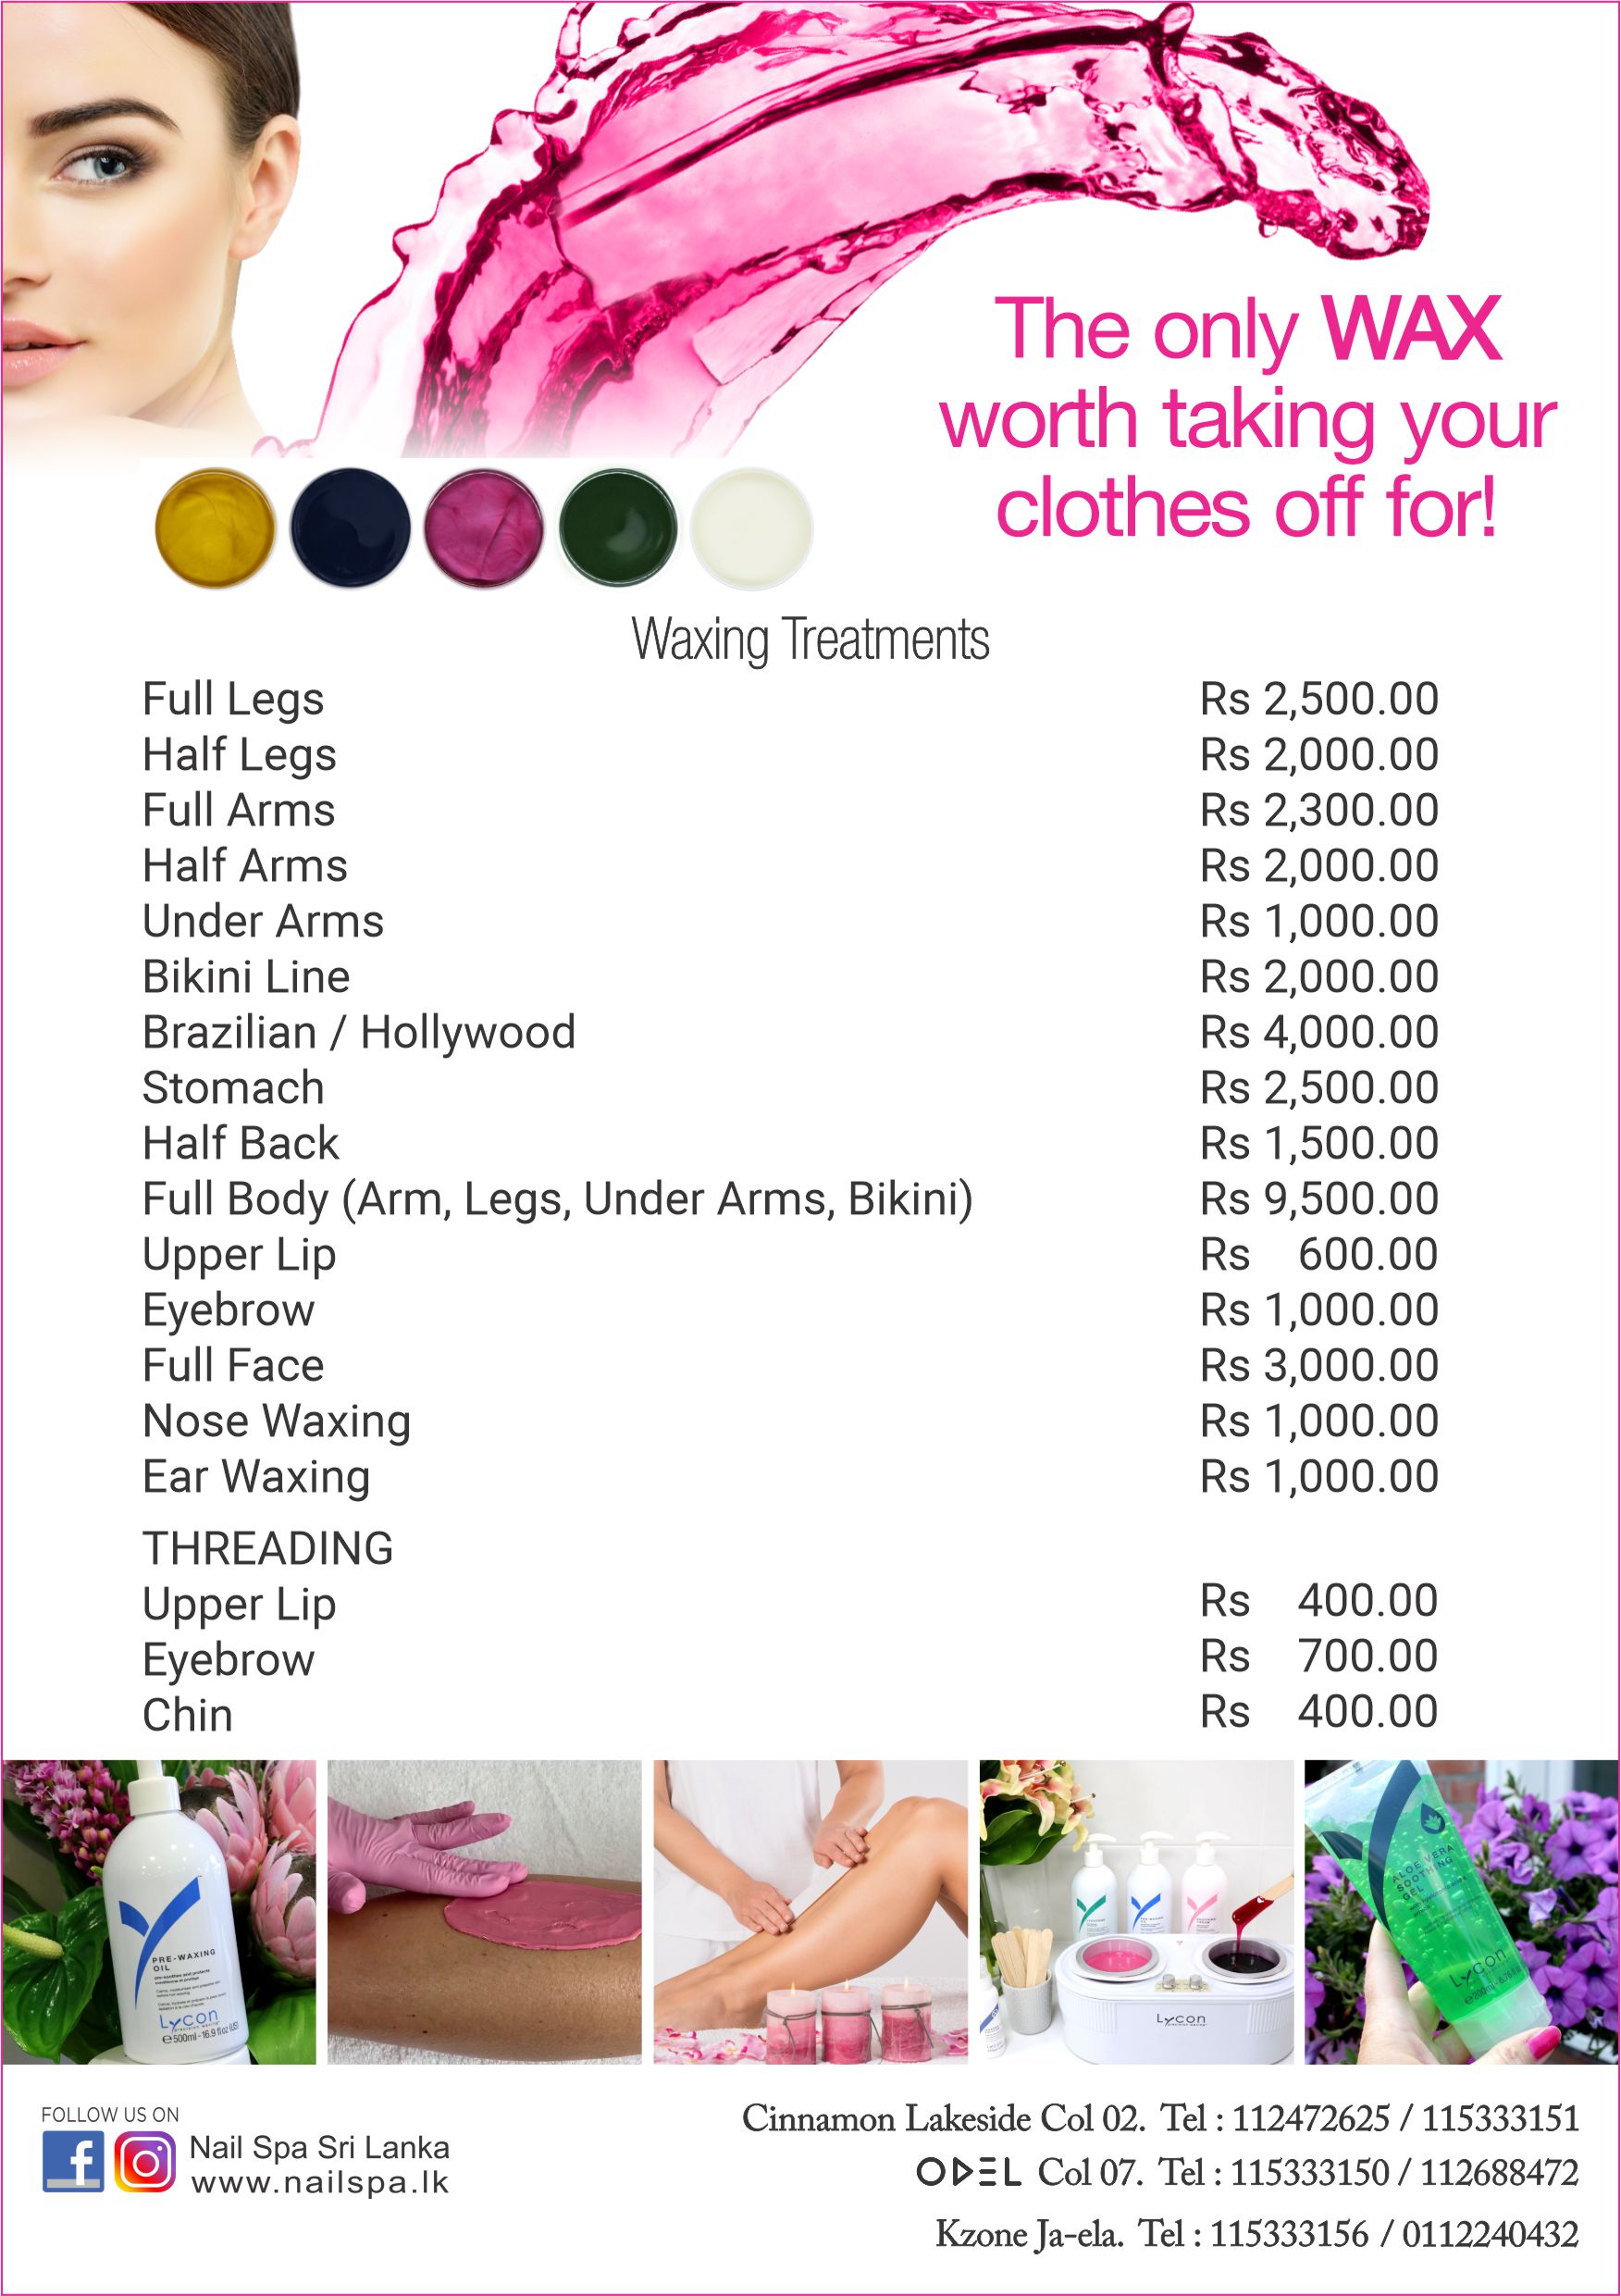 10 Best Nail Salons & Spas in Jakarta | What's New Indonesia